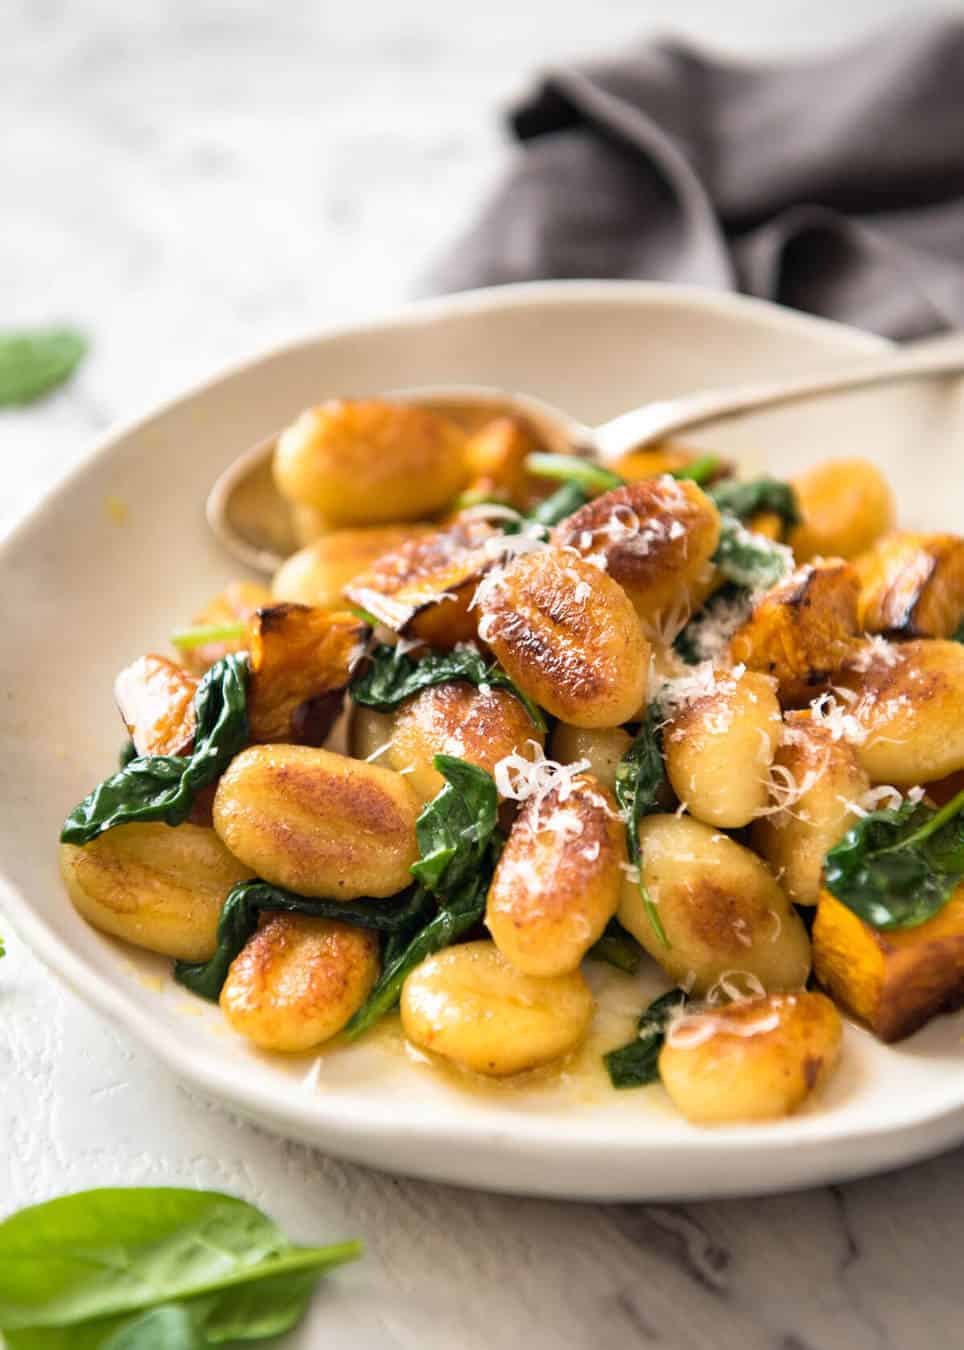 Pan Fried Gnocchi with Pumpkin and Spinach - Golden crispy on the outside, soft on the inside, with a butter sage sauce, roasted pumpkin and spinach. www.recipetineats.com